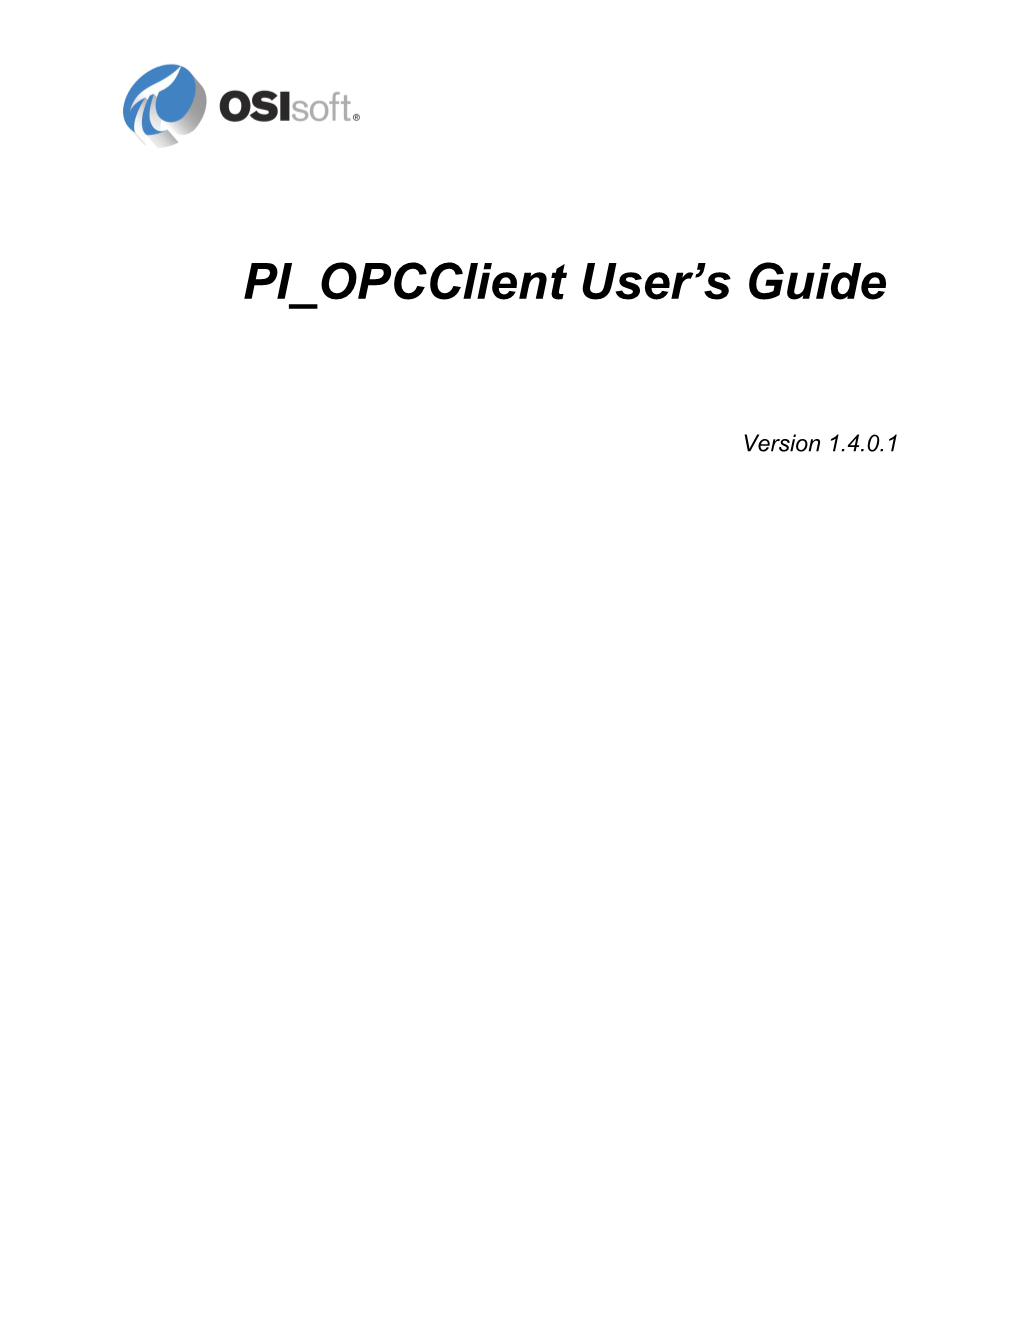 PI Opcclient User S Guide